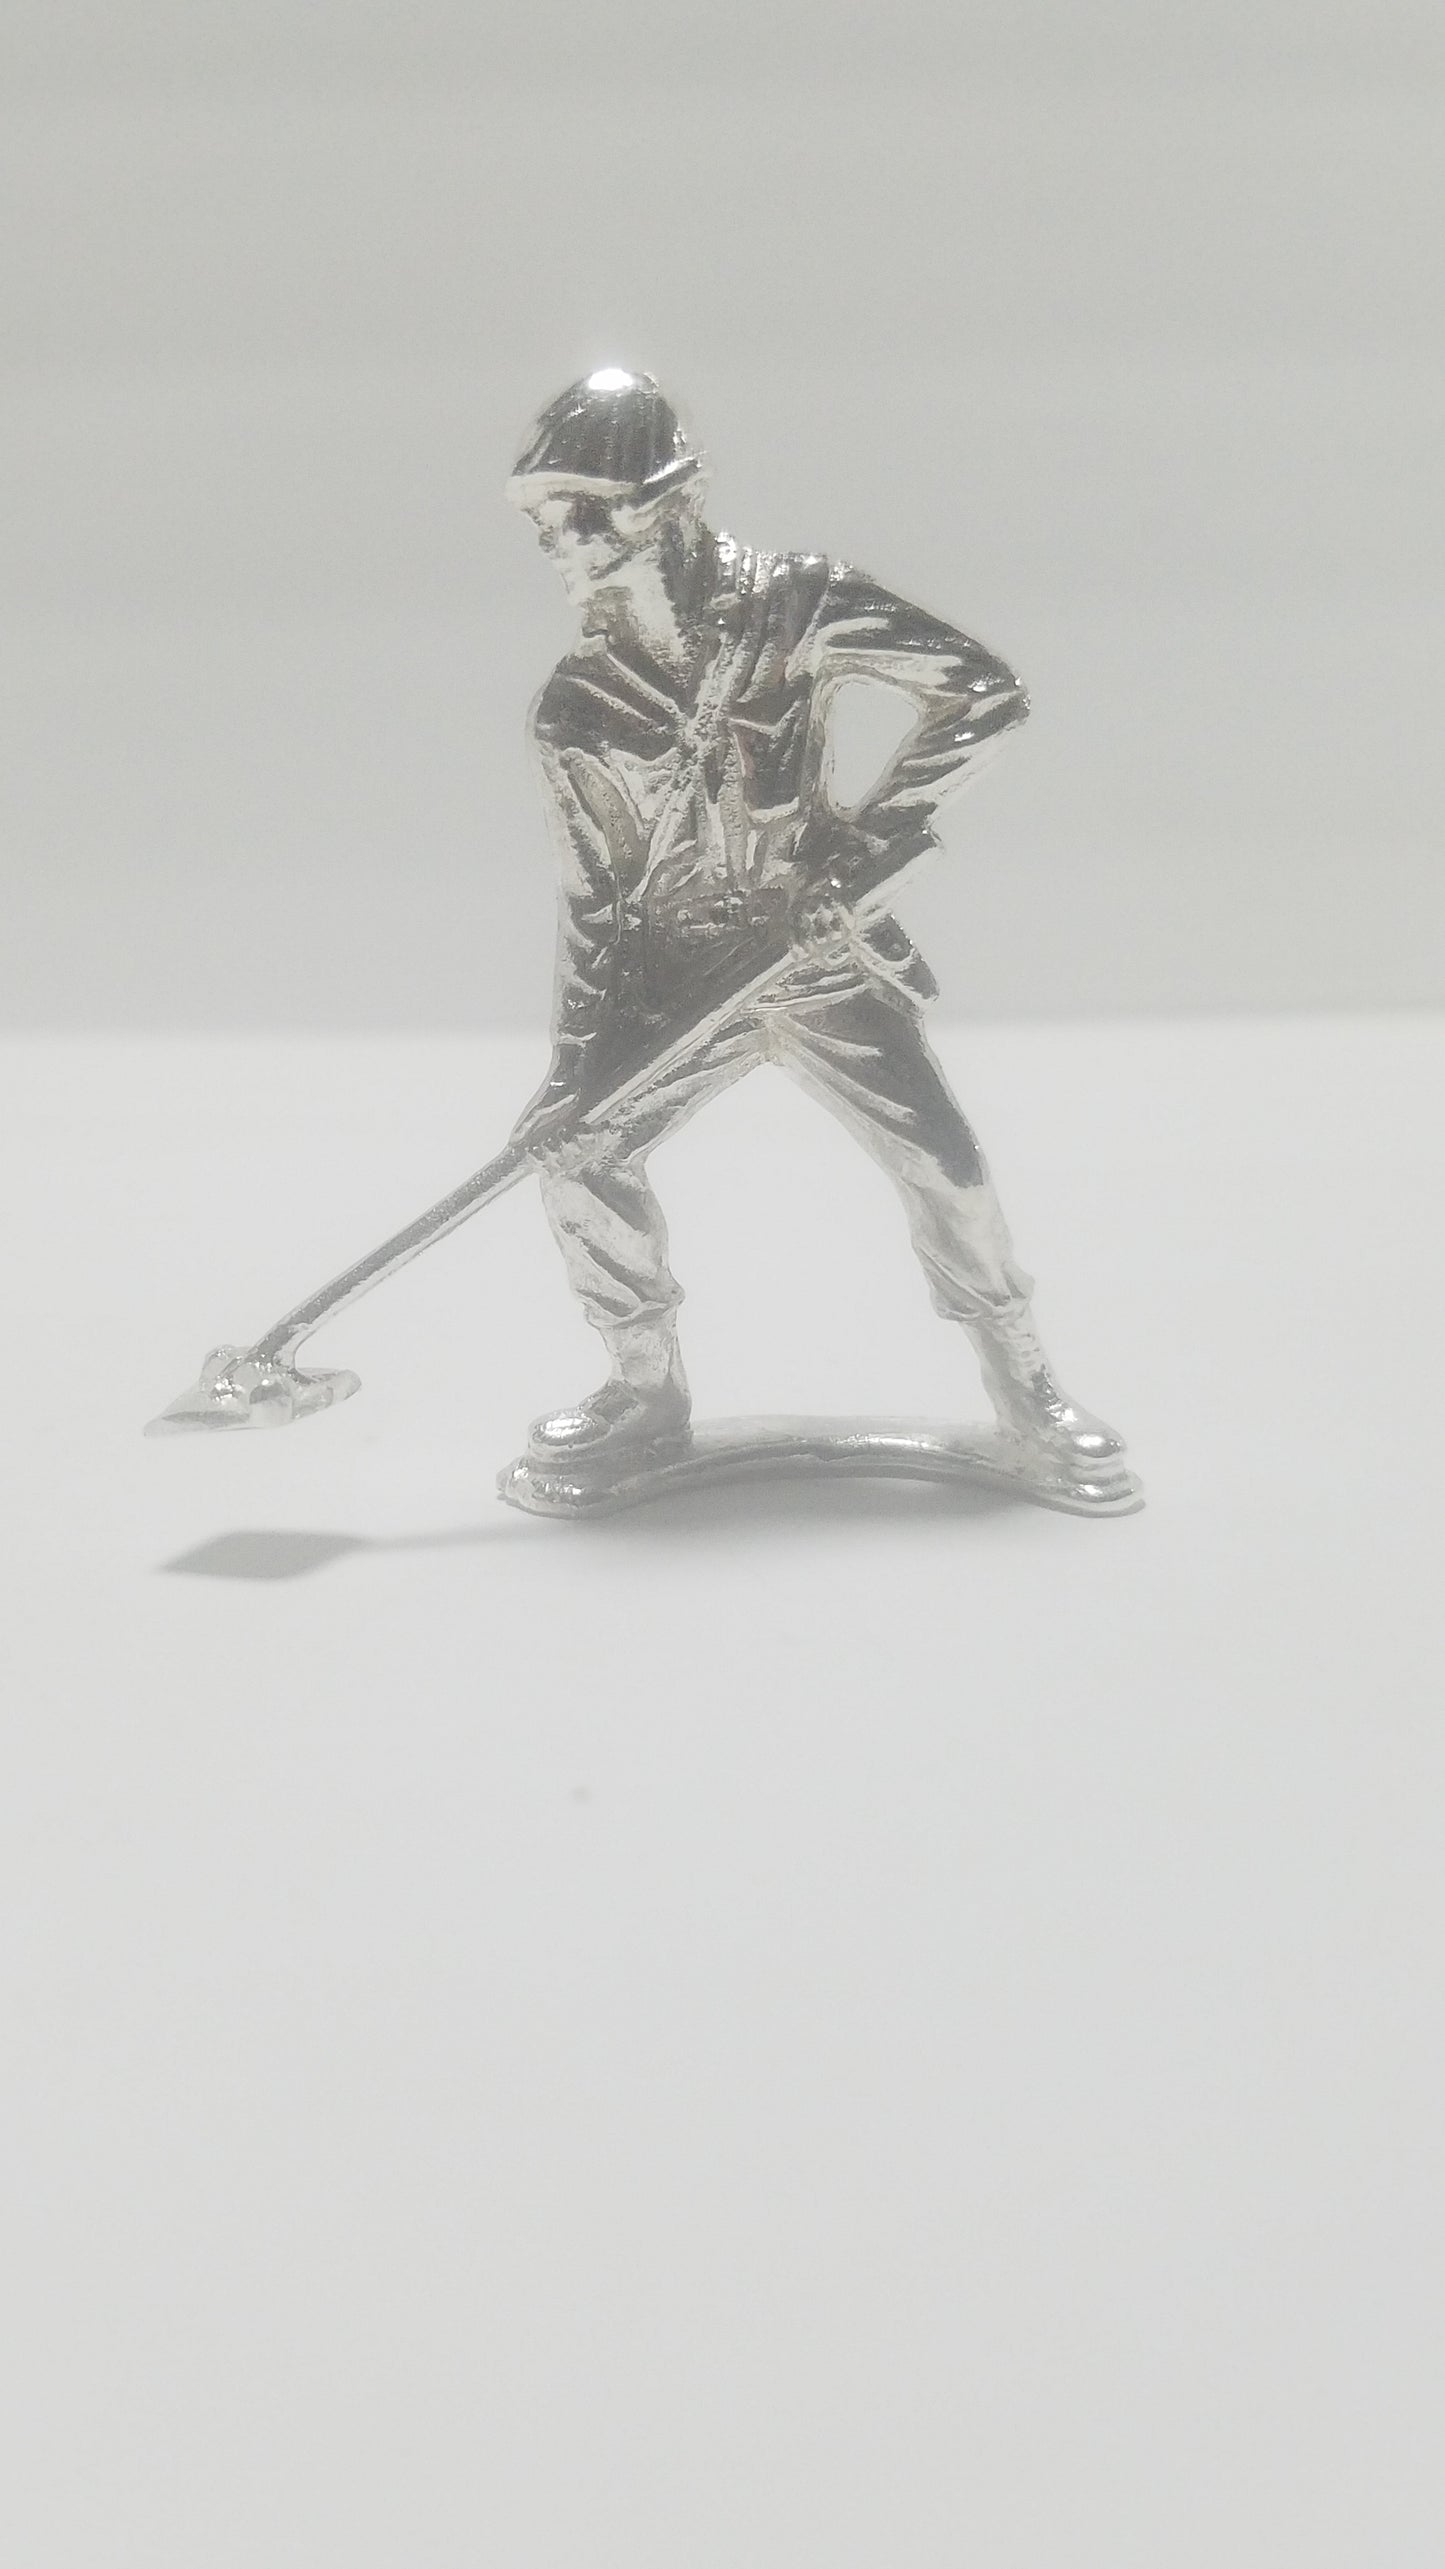 Classic Army Man Mine Sweeper Silver Toy Soldier .999 Fine Silver